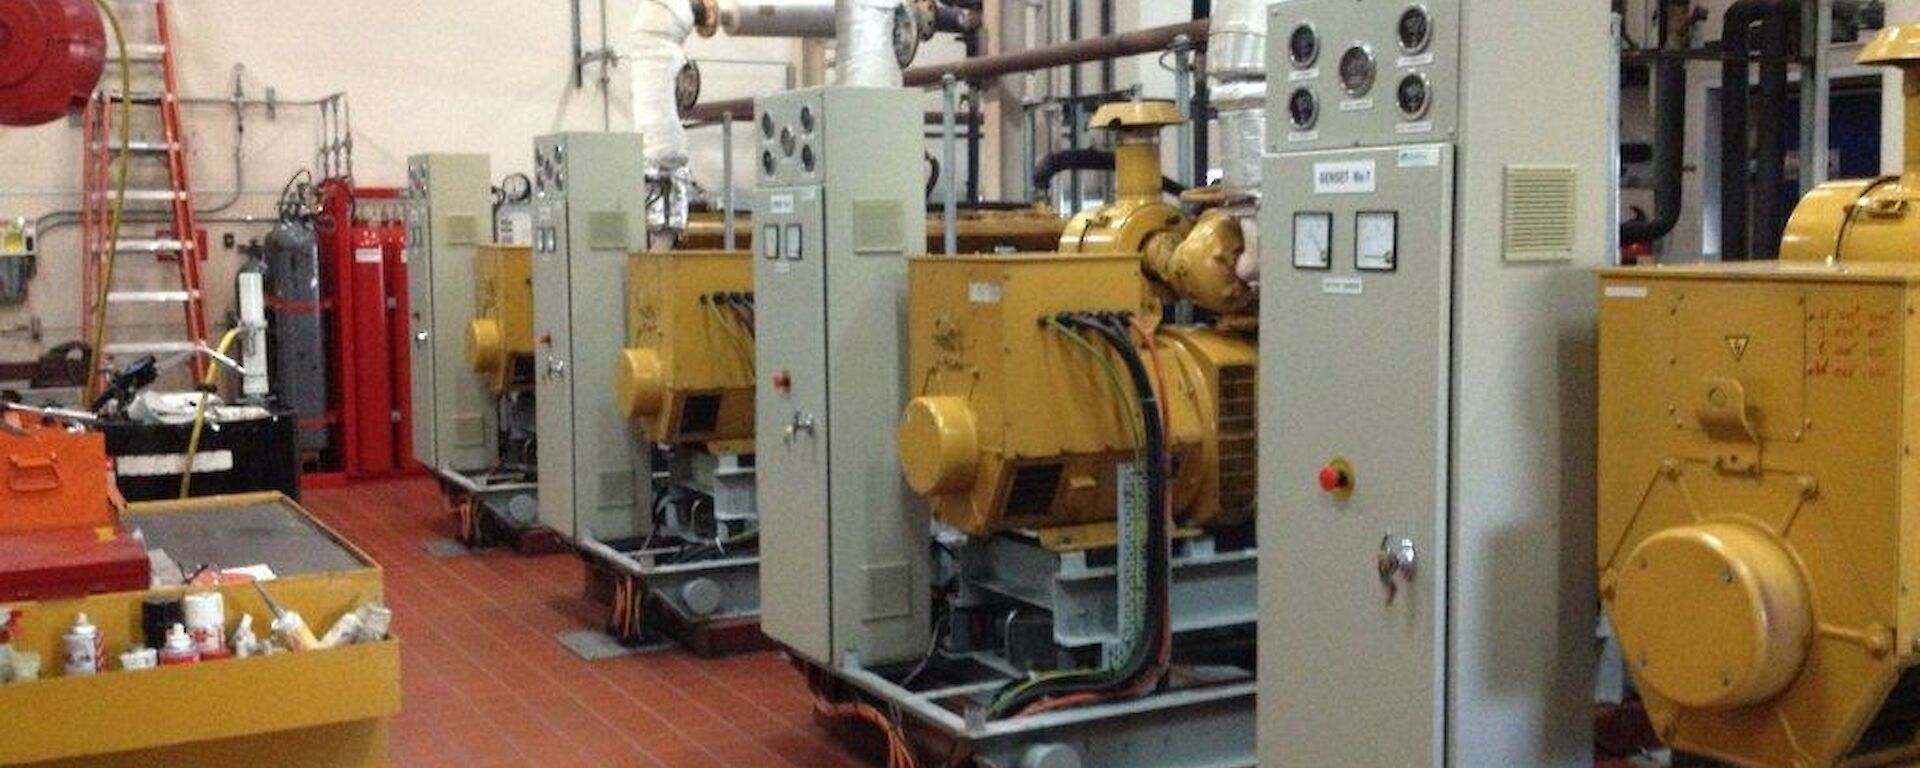 Inside the main power house with the four generators lined up